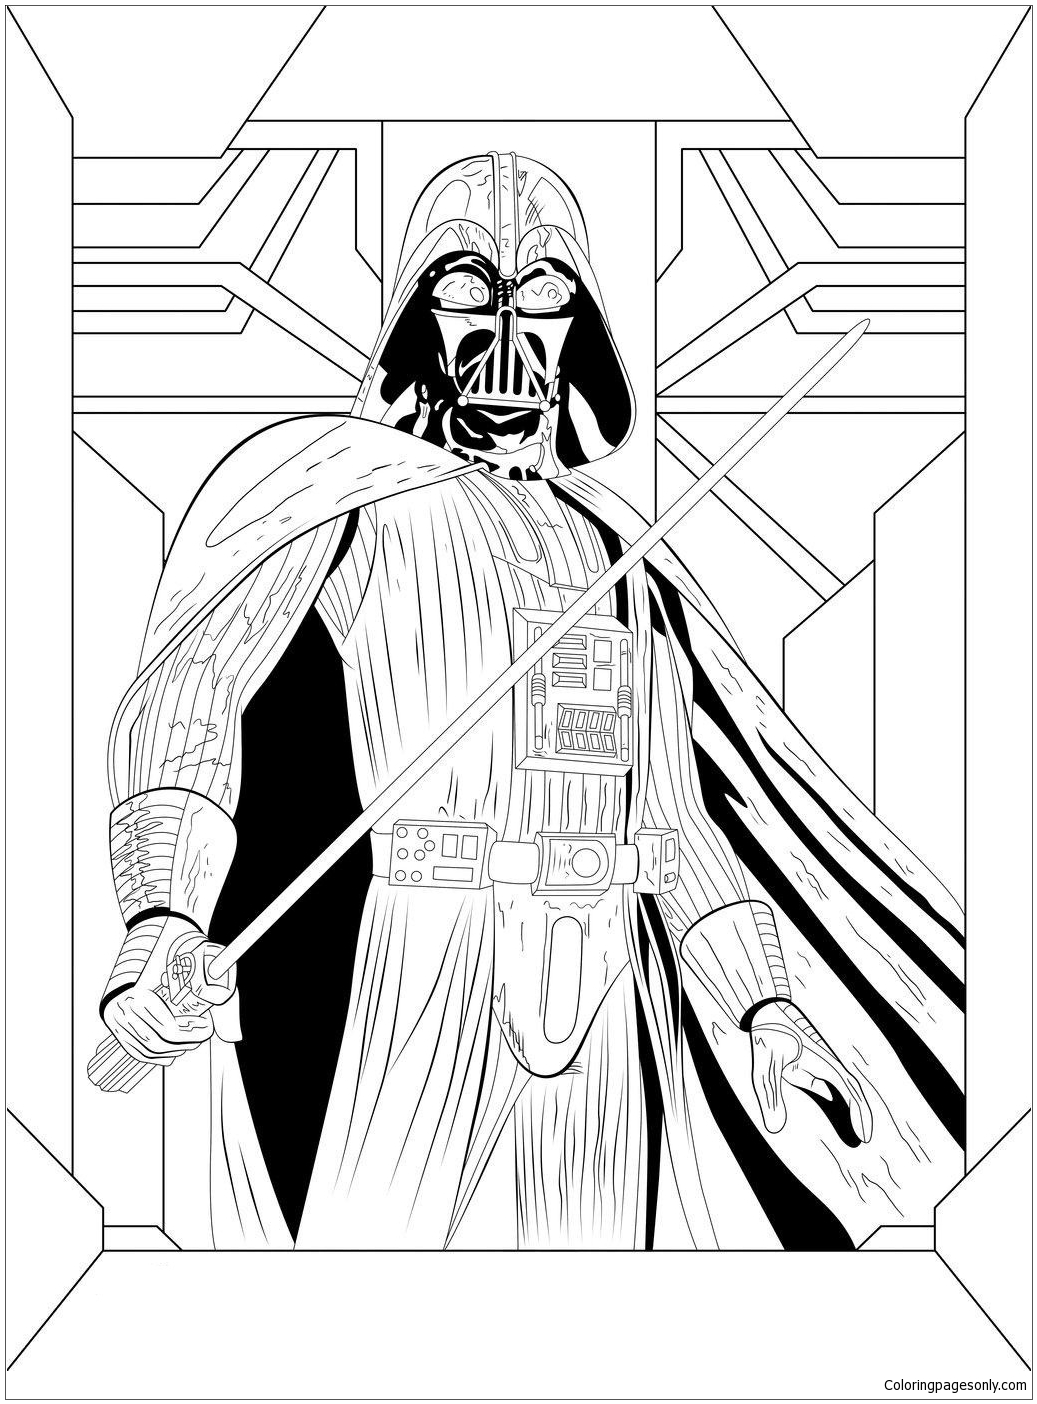 Download Darth Vader from Star Wars 2 Coloring Page - Free Coloring Pages Online